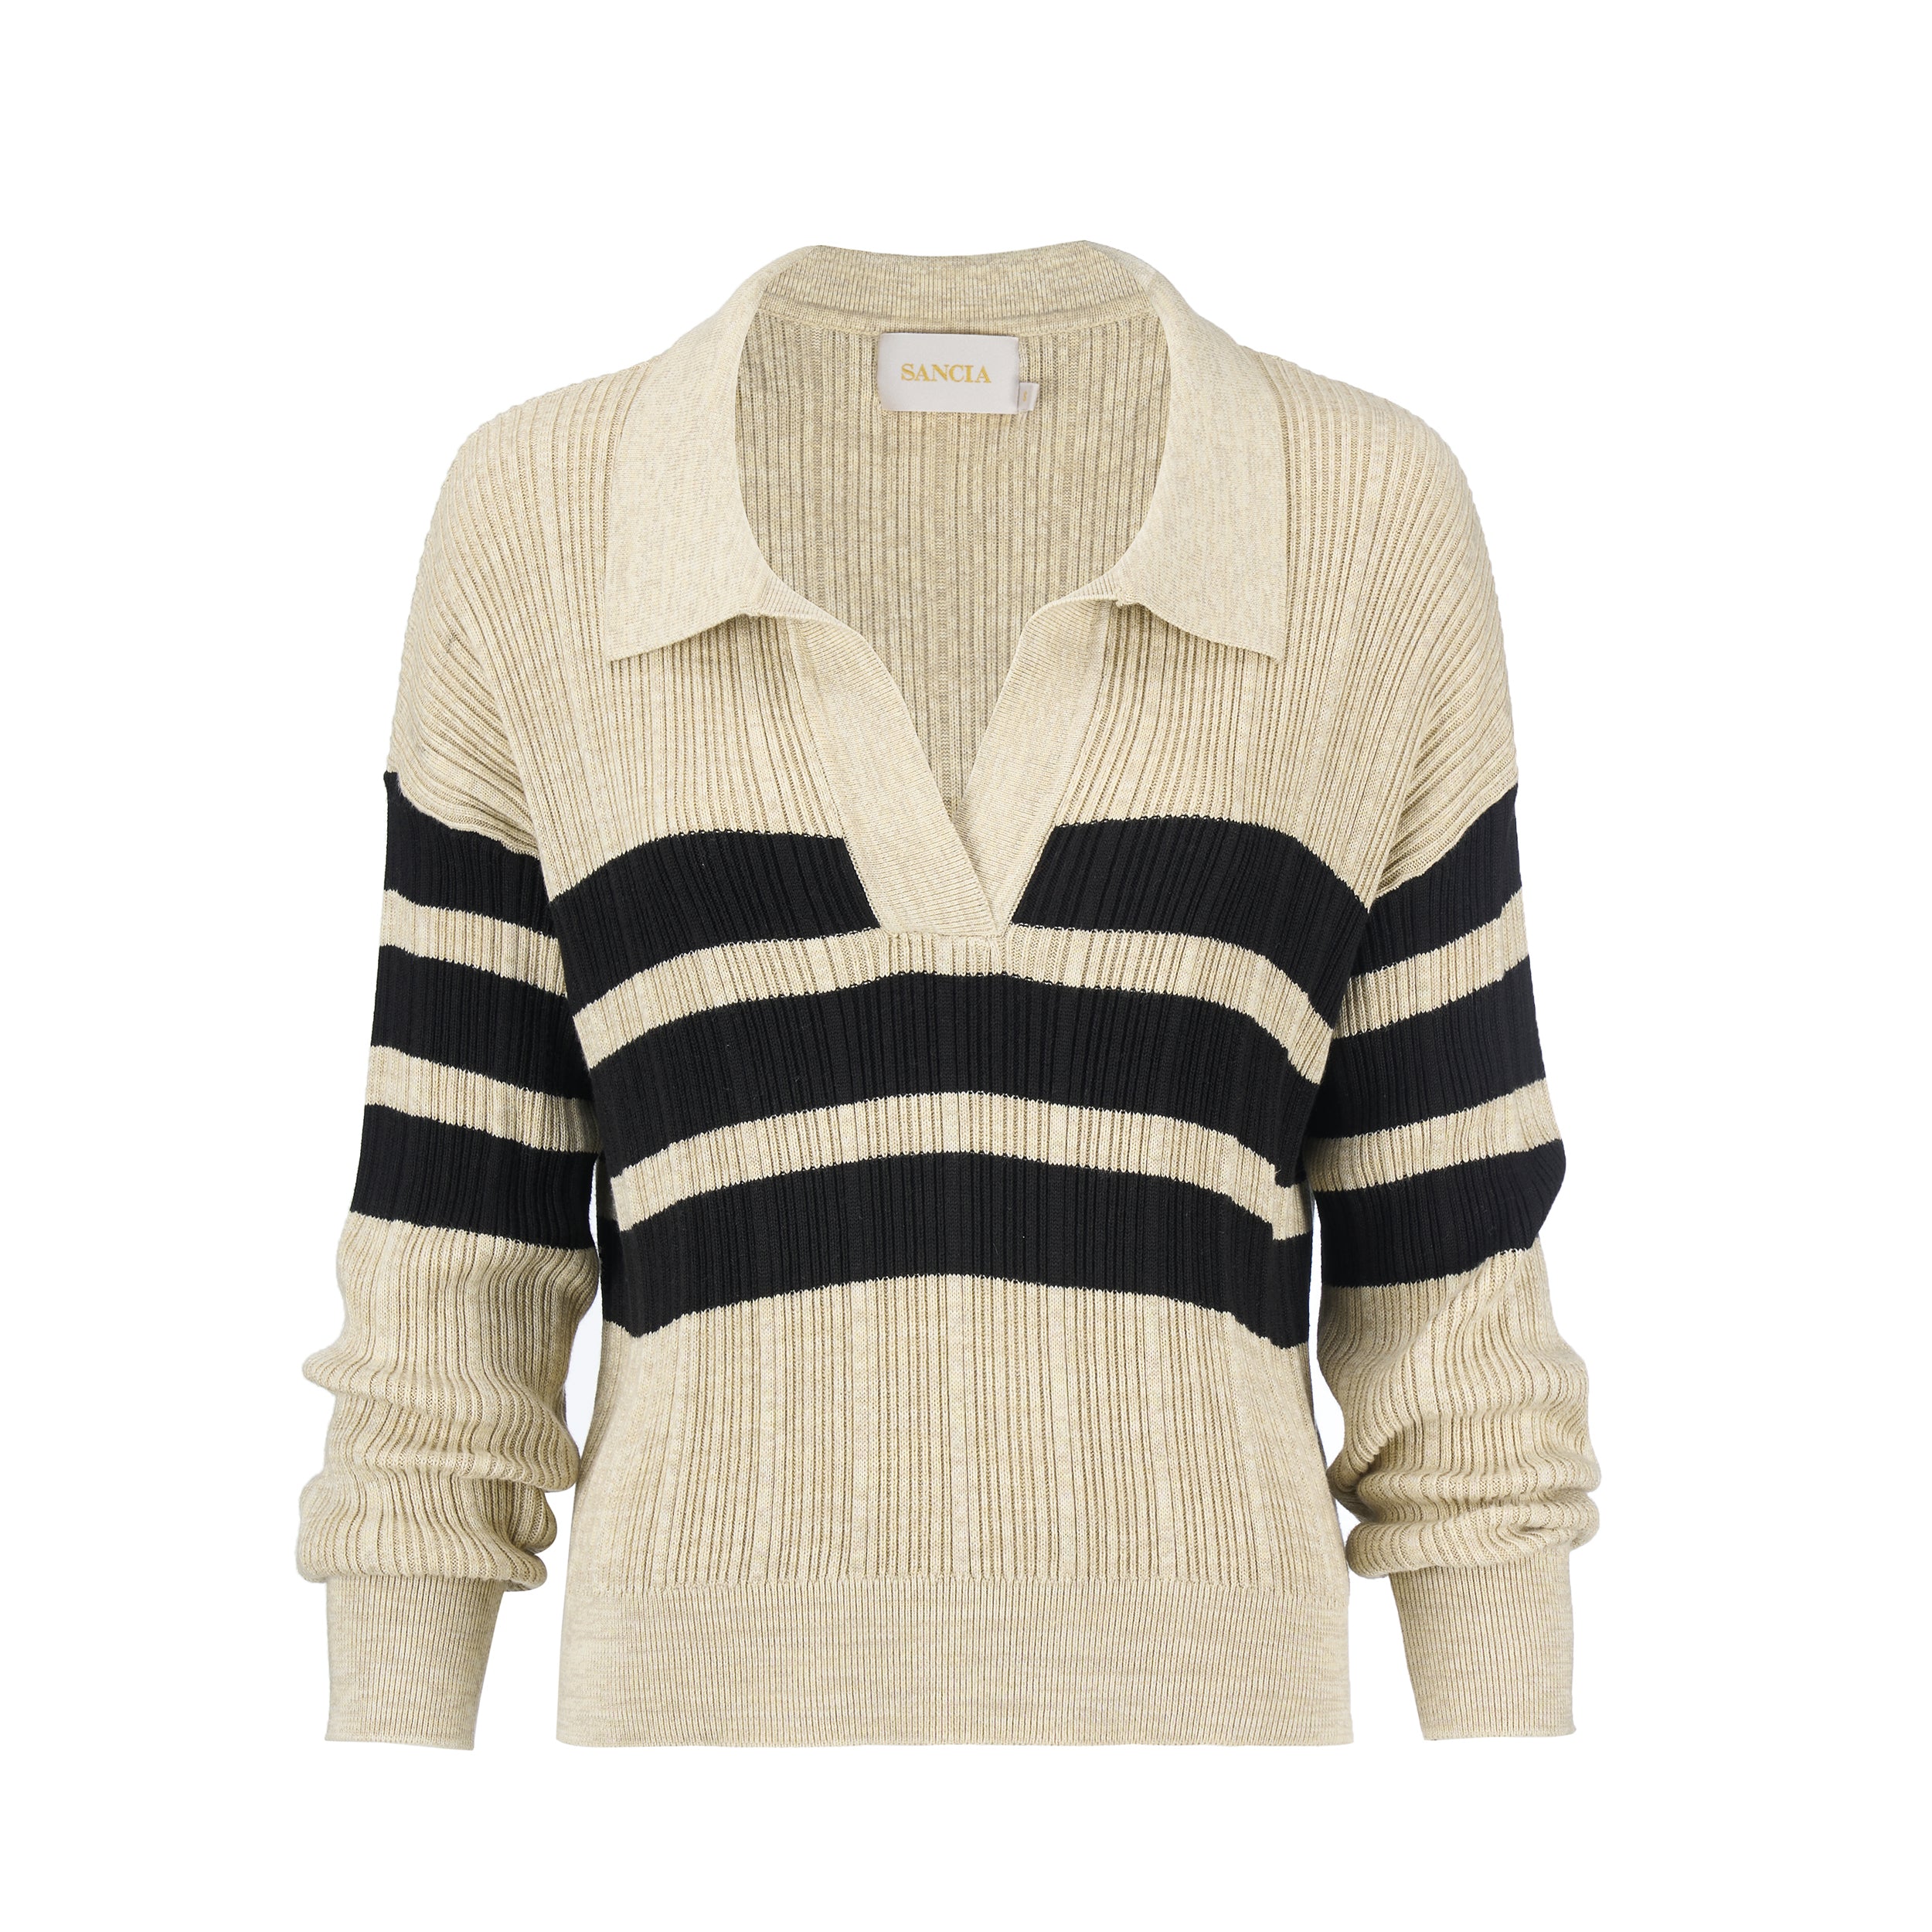 THE HELOISE KNIT JUMPER